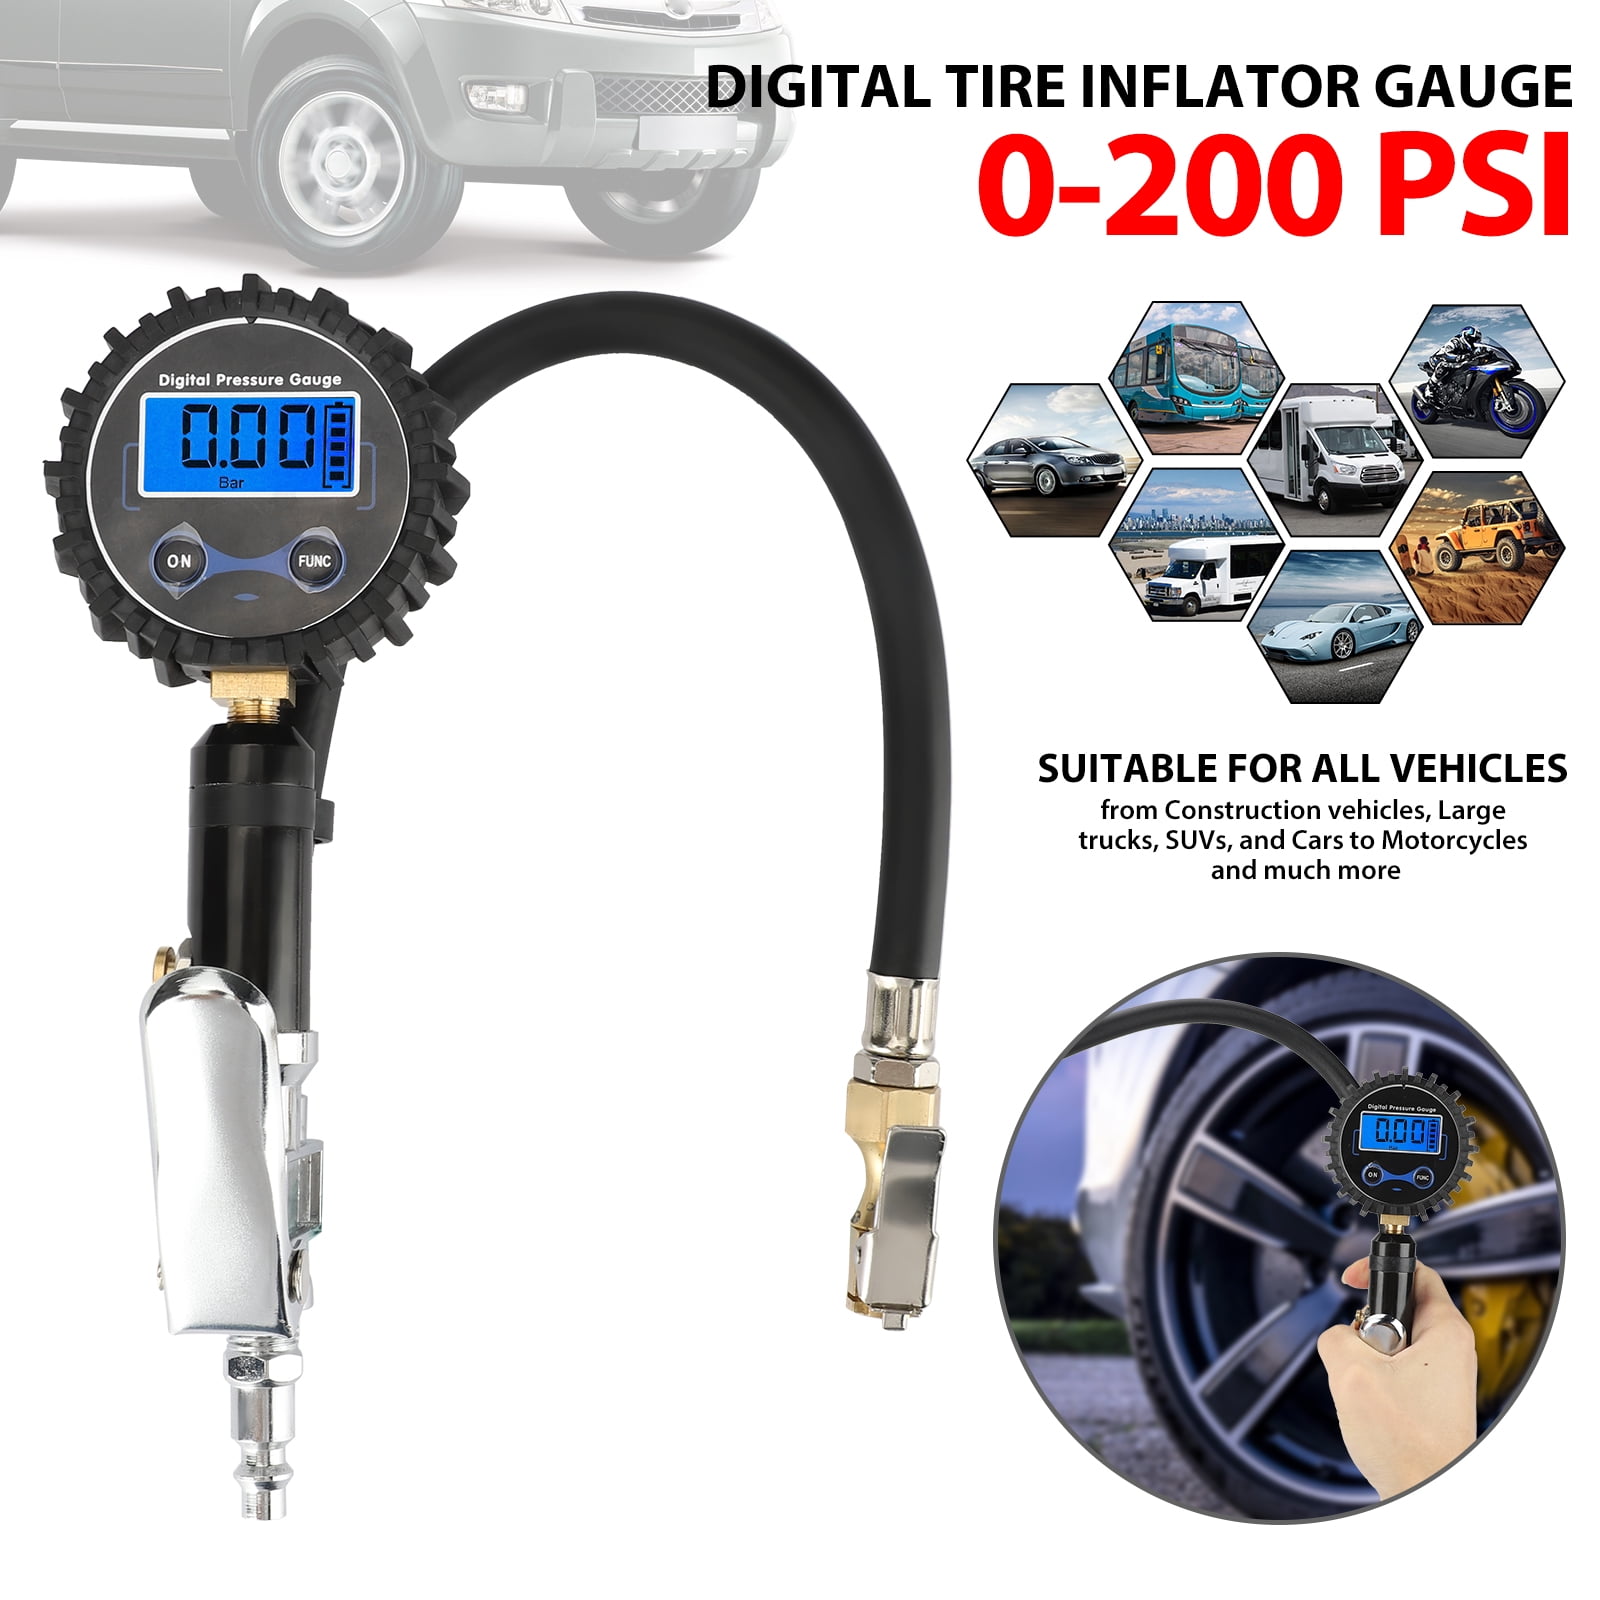 AUTO AIR GAGE TIRE INFLATOR FOR AIR COMPRESSOR DIGITAL PRESSURE GAUGE WITH CHUCK 